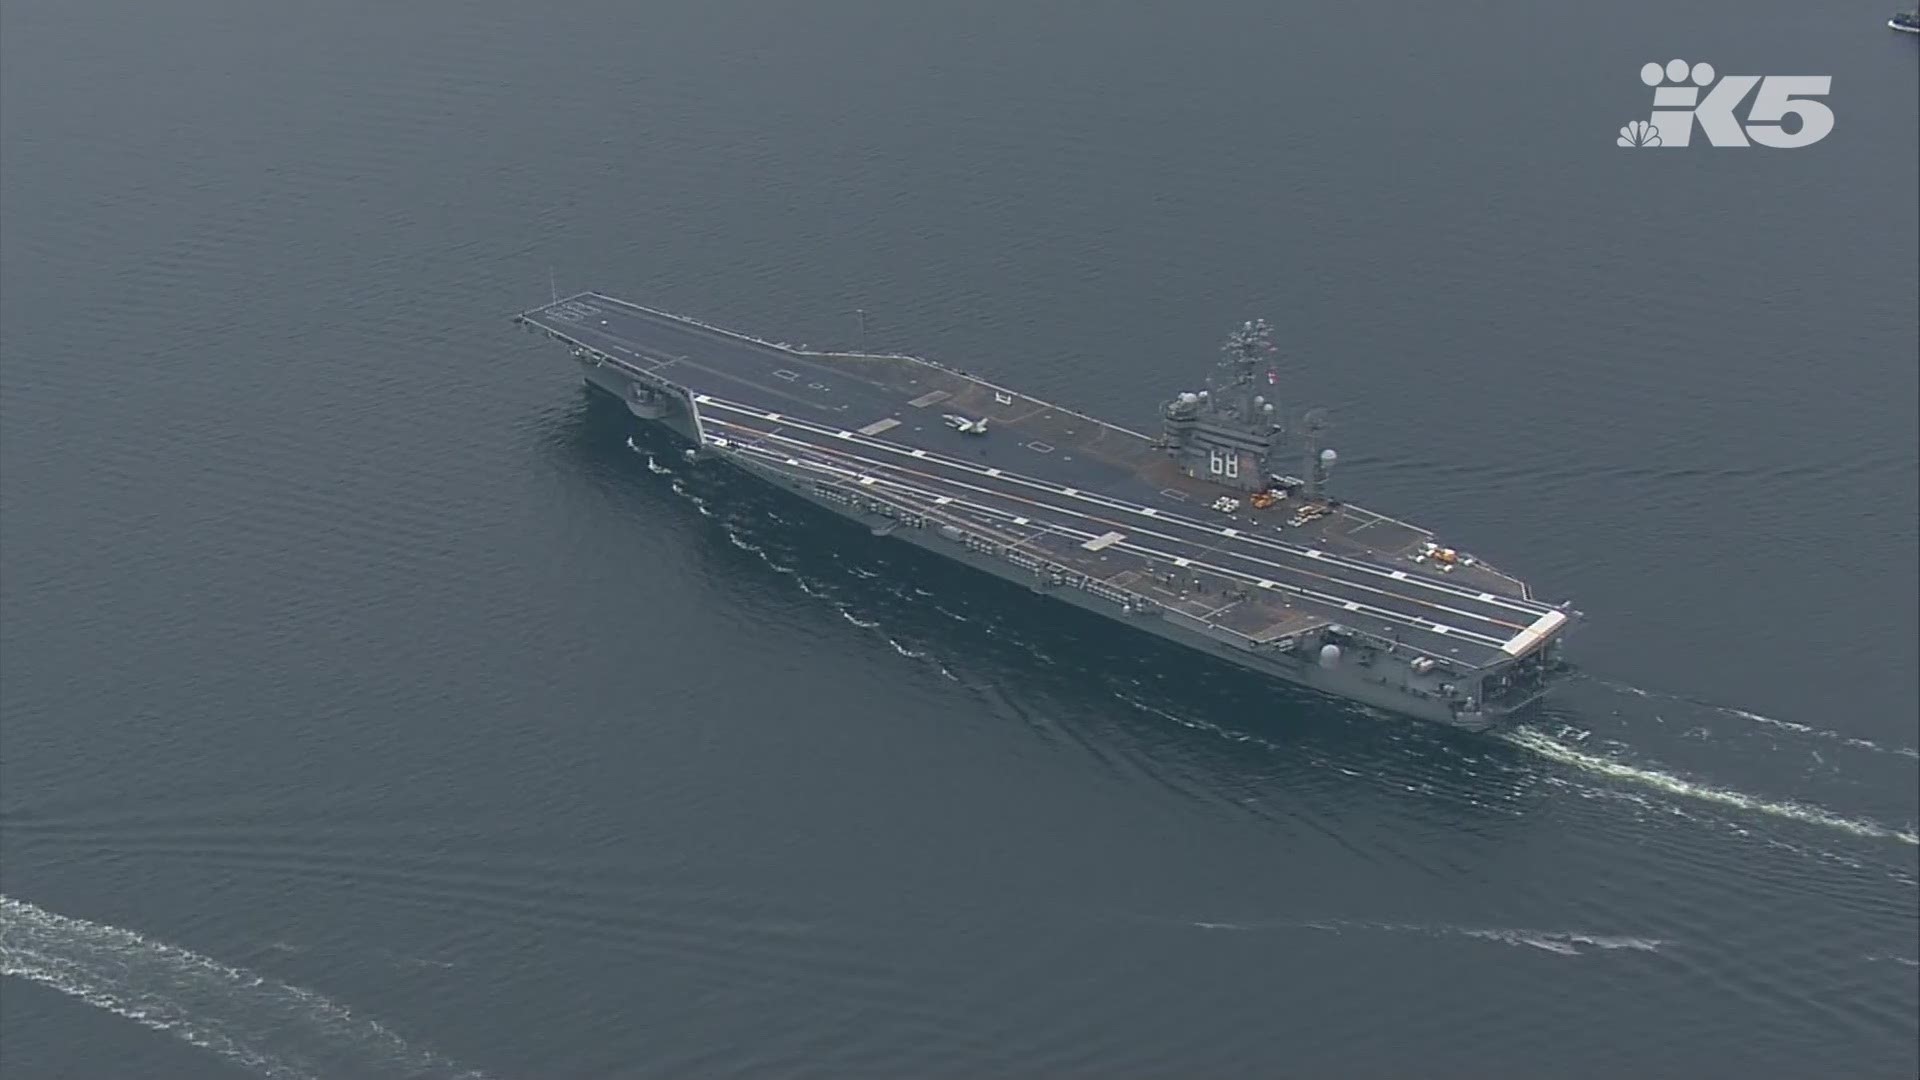 The U.S. Navy aircraft carrier returned from a training exercise.